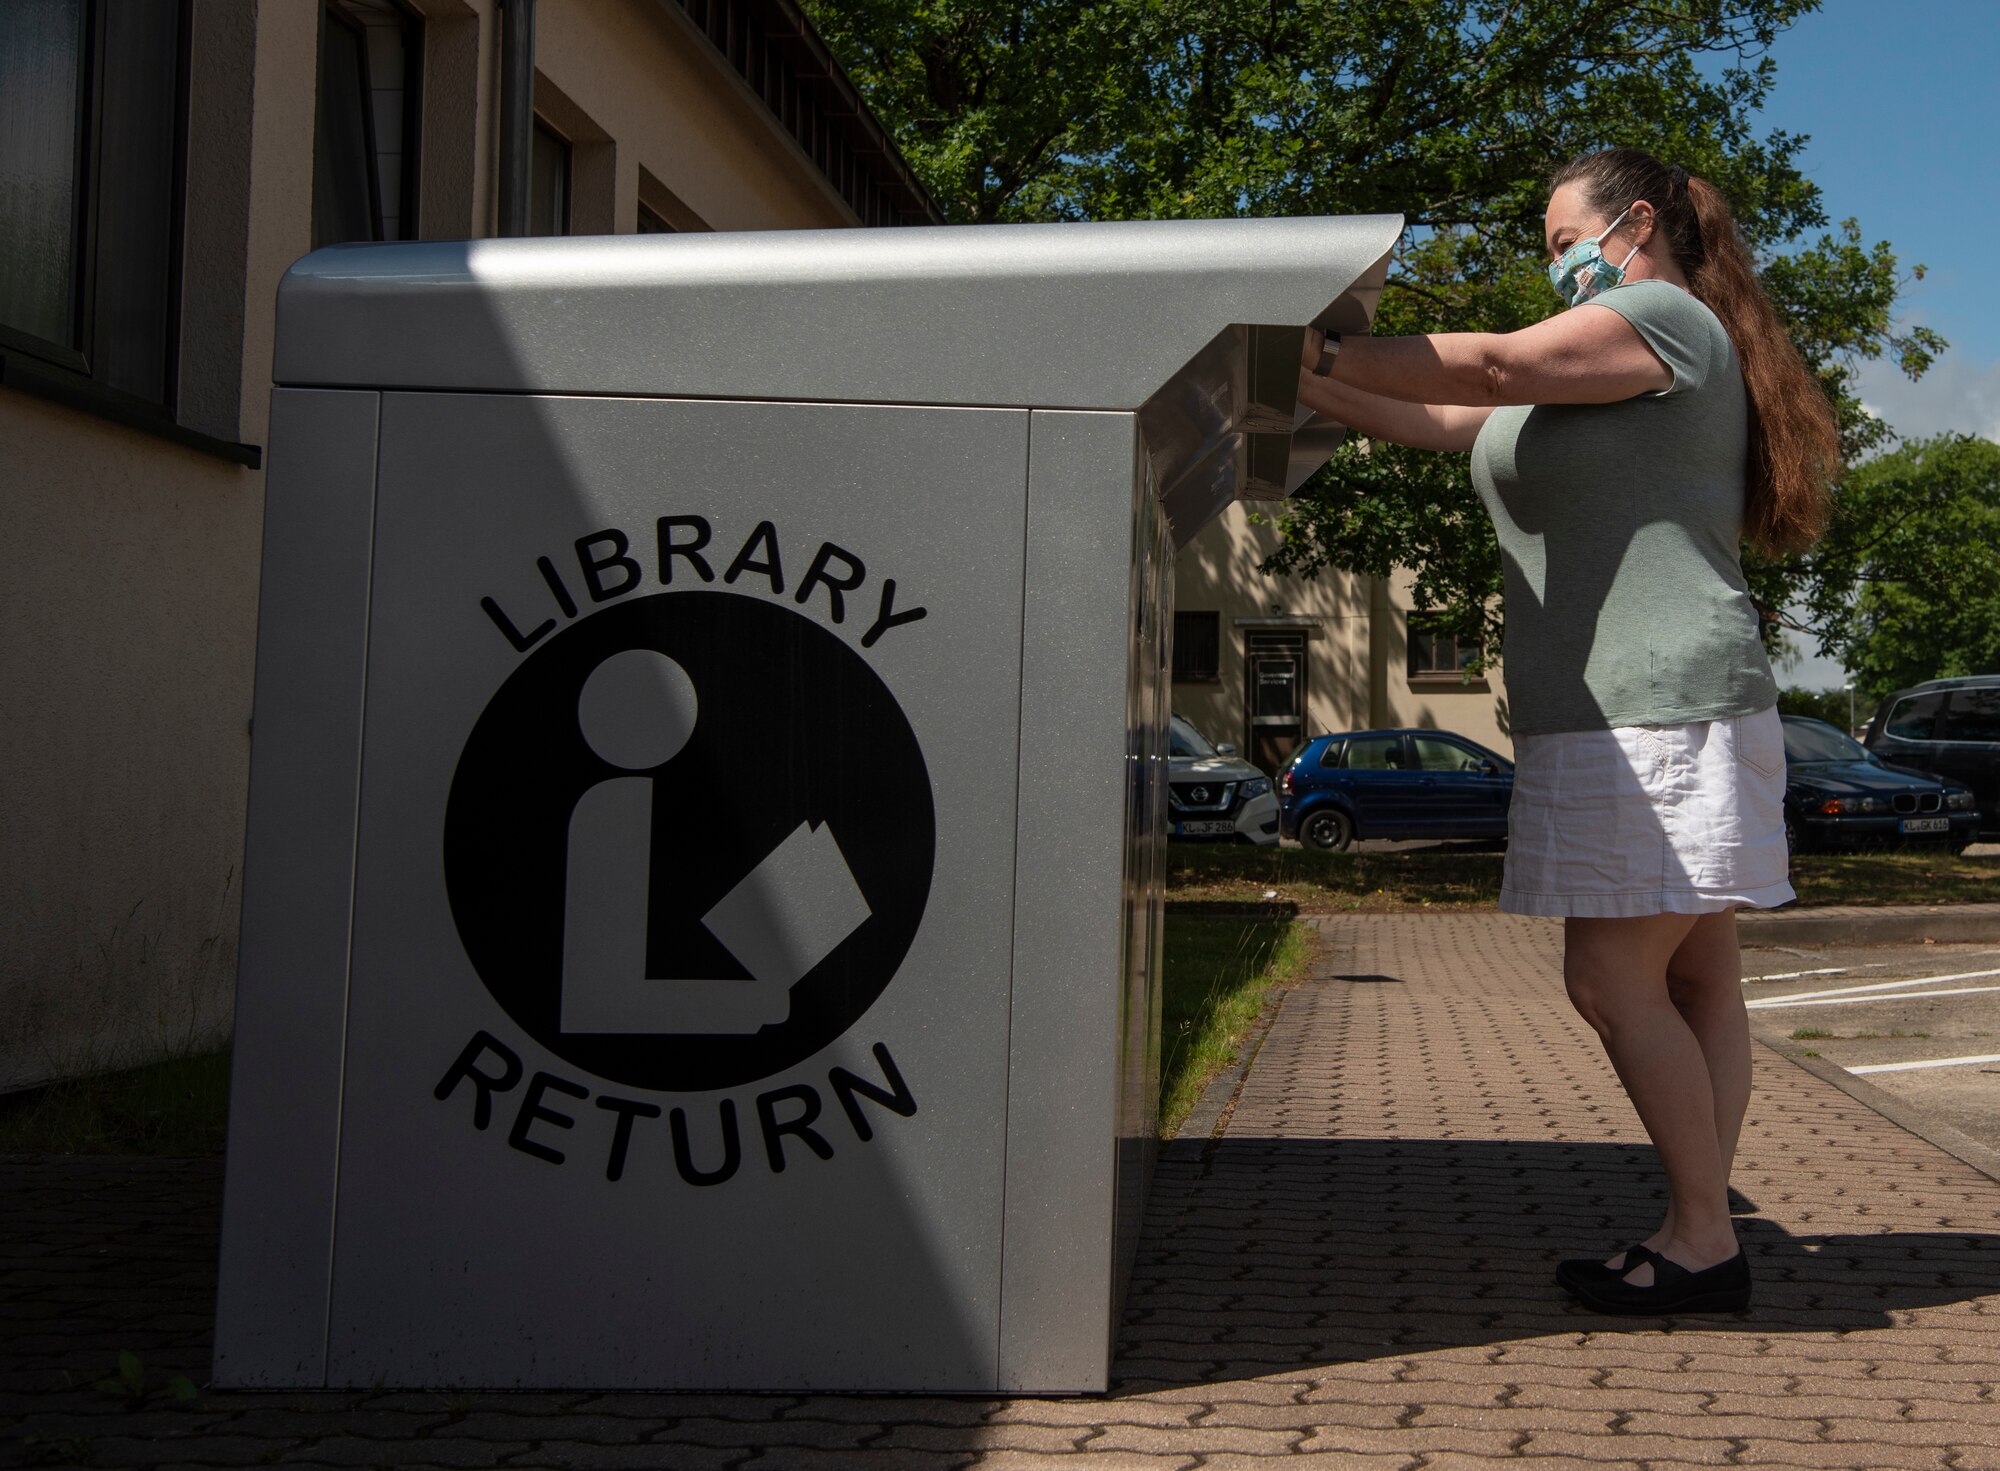 The return bin is for the safety of the customers and the staff. Due to regulations, library materials cannot be sanitized by hand and are quarantined for seven days in an isolated room.